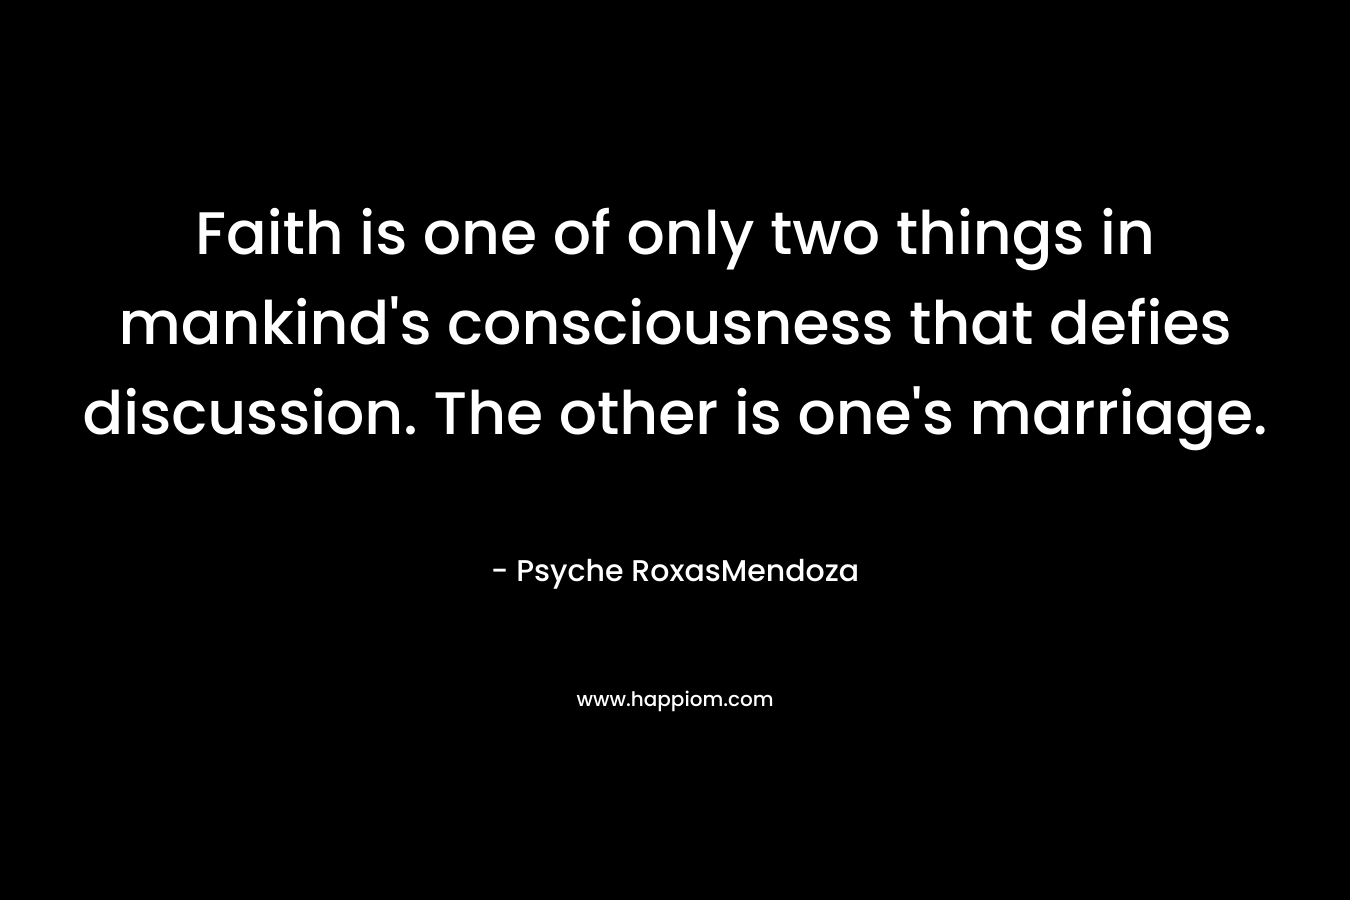 Faith is one of only two things in mankind's consciousness that defies discussion. The other is one's marriage.